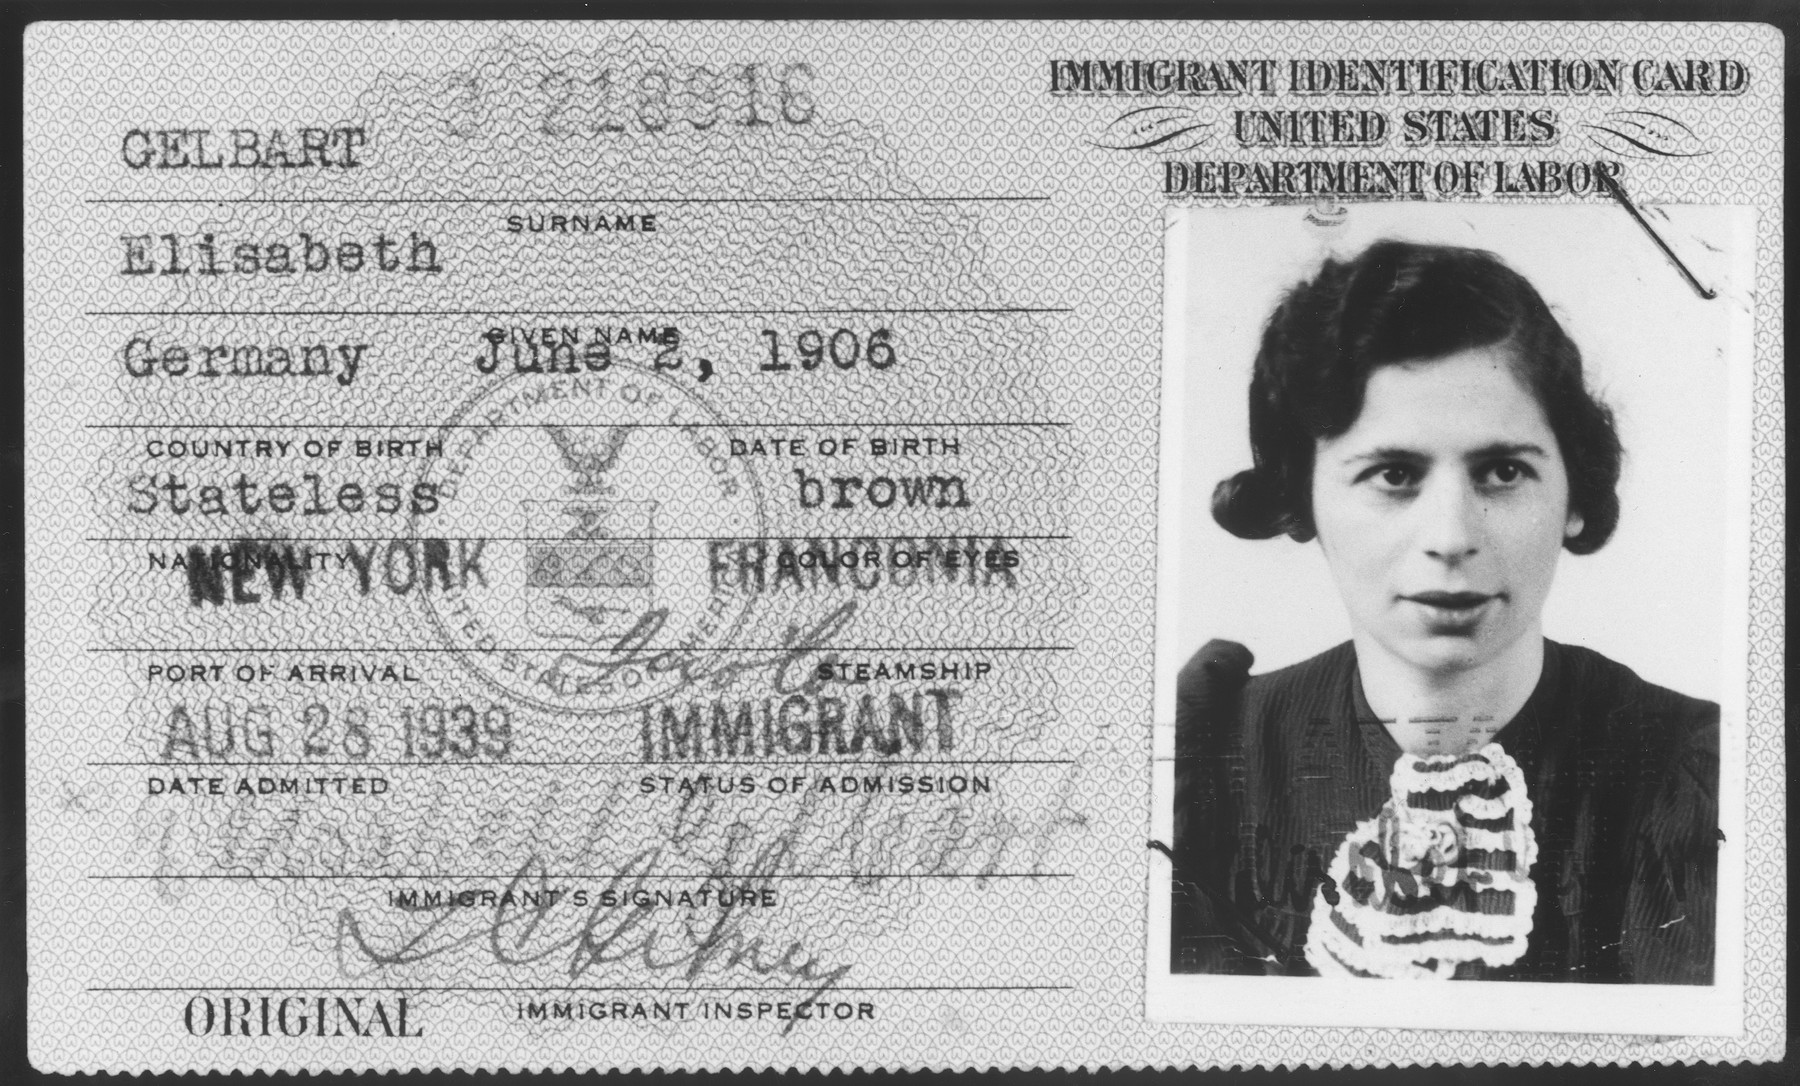 United States immigration card issued to Elisabeth Gelbart. Though born in Germany, her nationality is listed as "stateless".